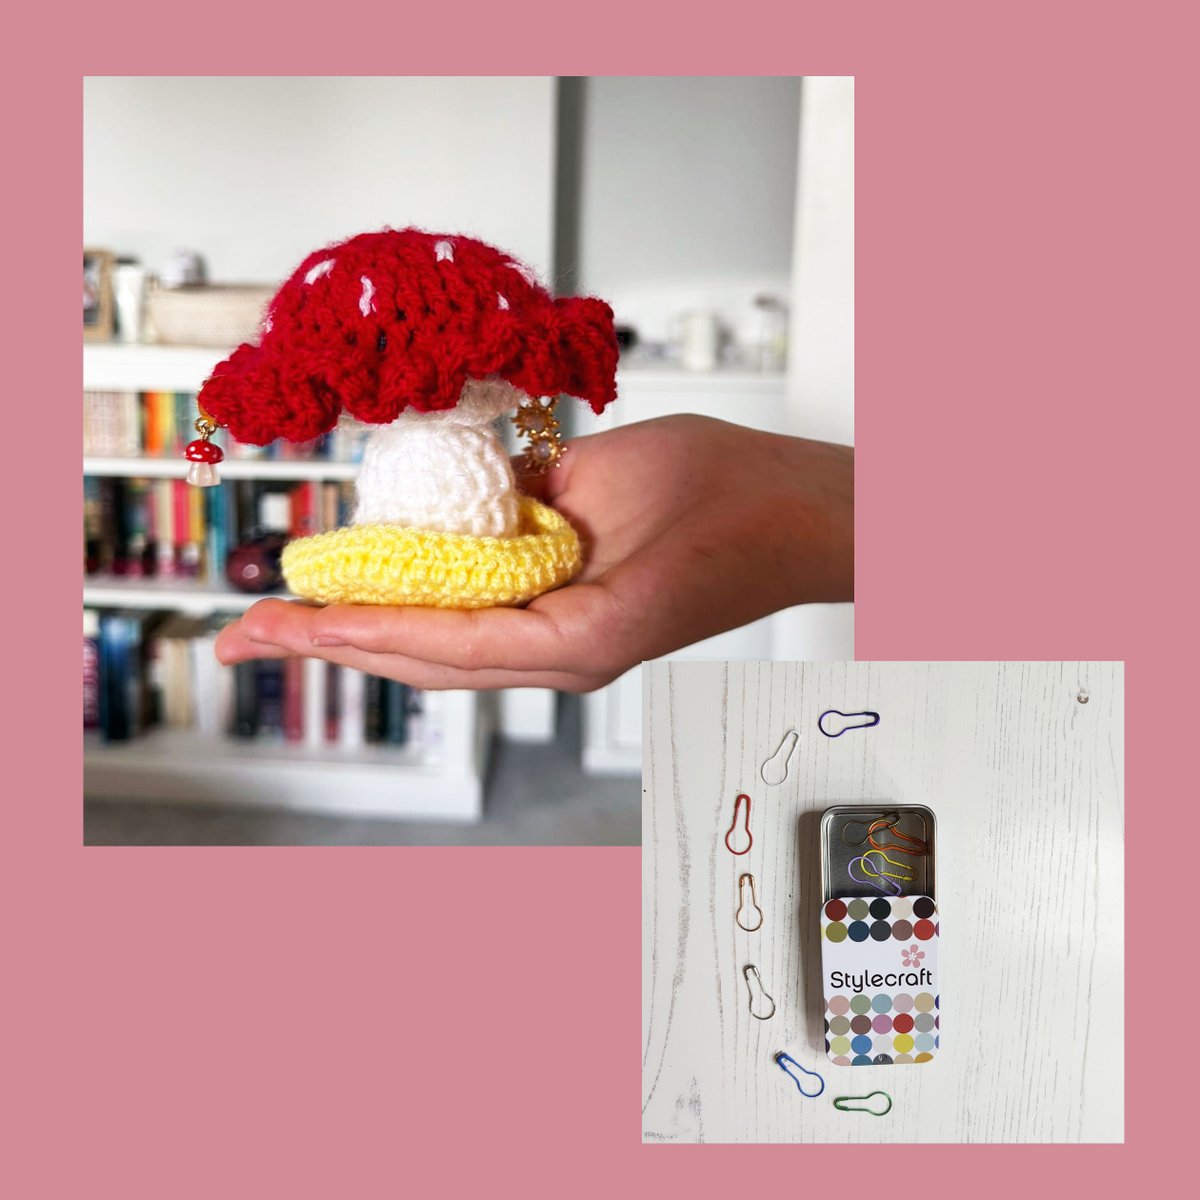 Our latest winners of the stitchmarker tins are Lucy French & her friend's 12 year old daughter who has recently taught herself how to crochet. Lucy says that 'Lily's been so determined & is now making squares & has even made an amigurumi toadstool freehand, no pattern required'